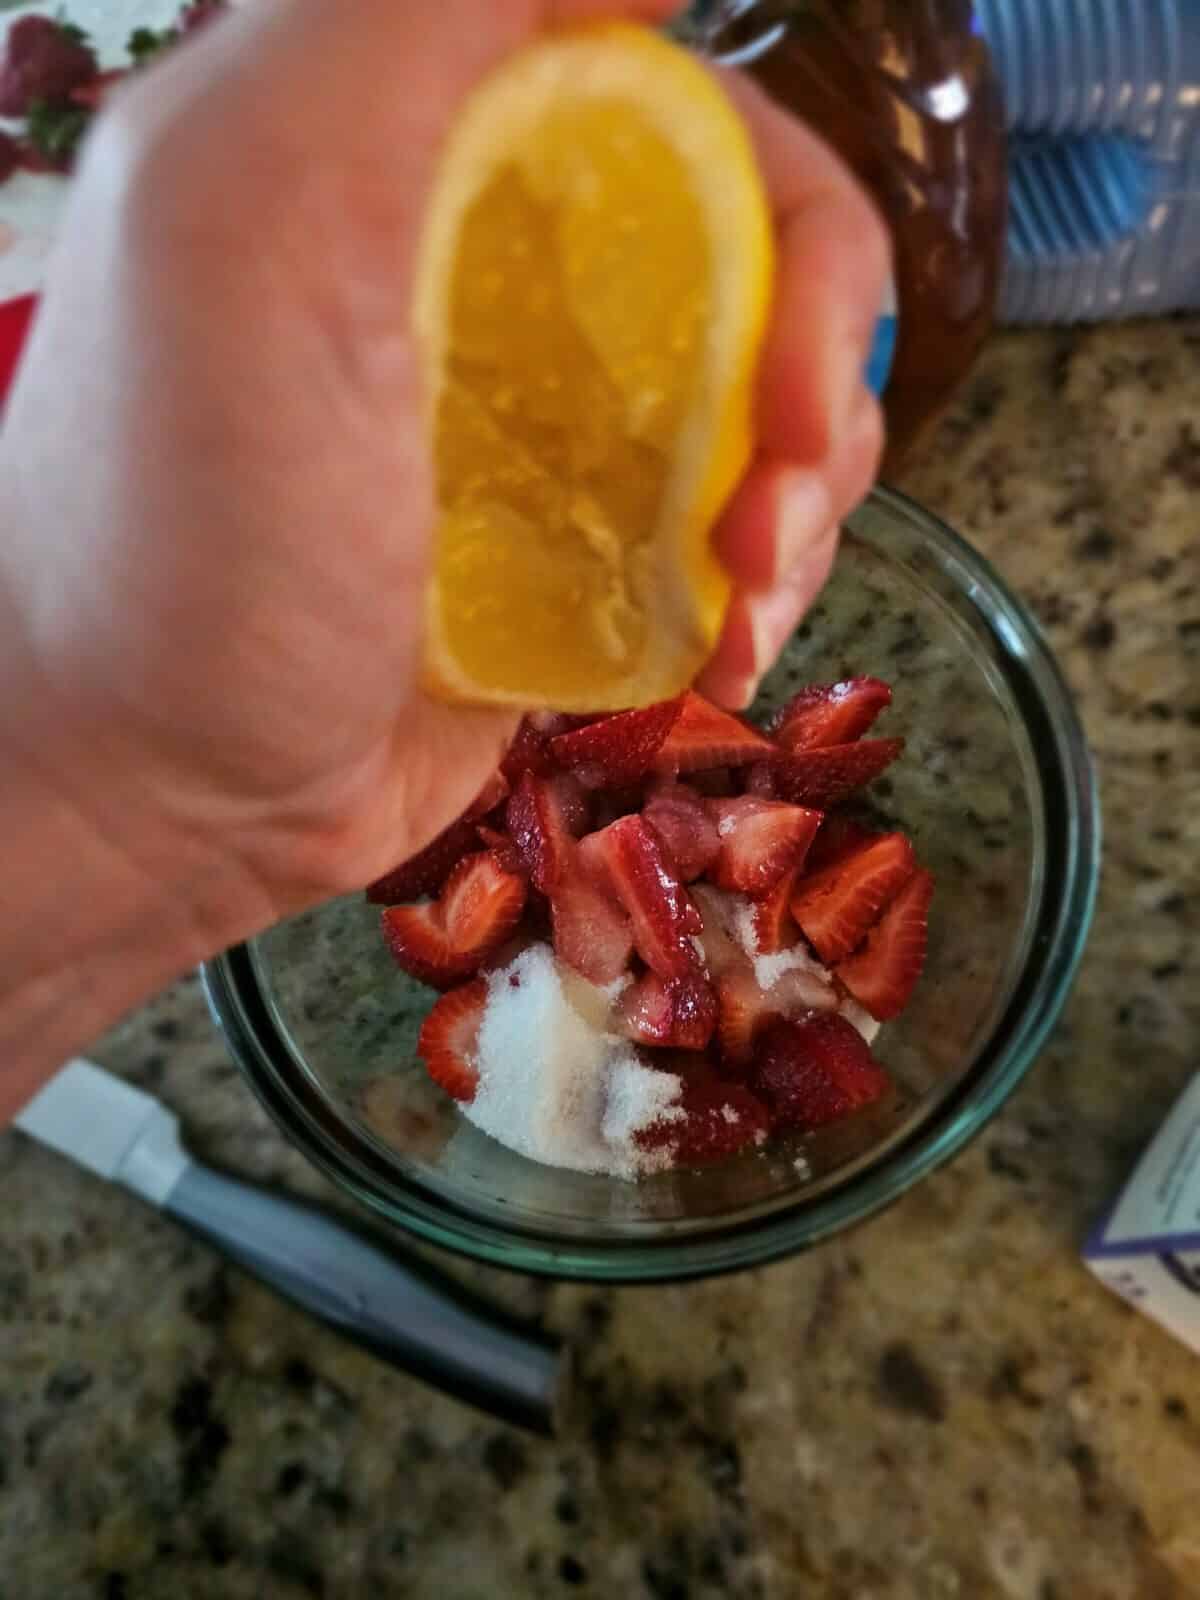 lemon squeezed into bowl with strawberries and sugar